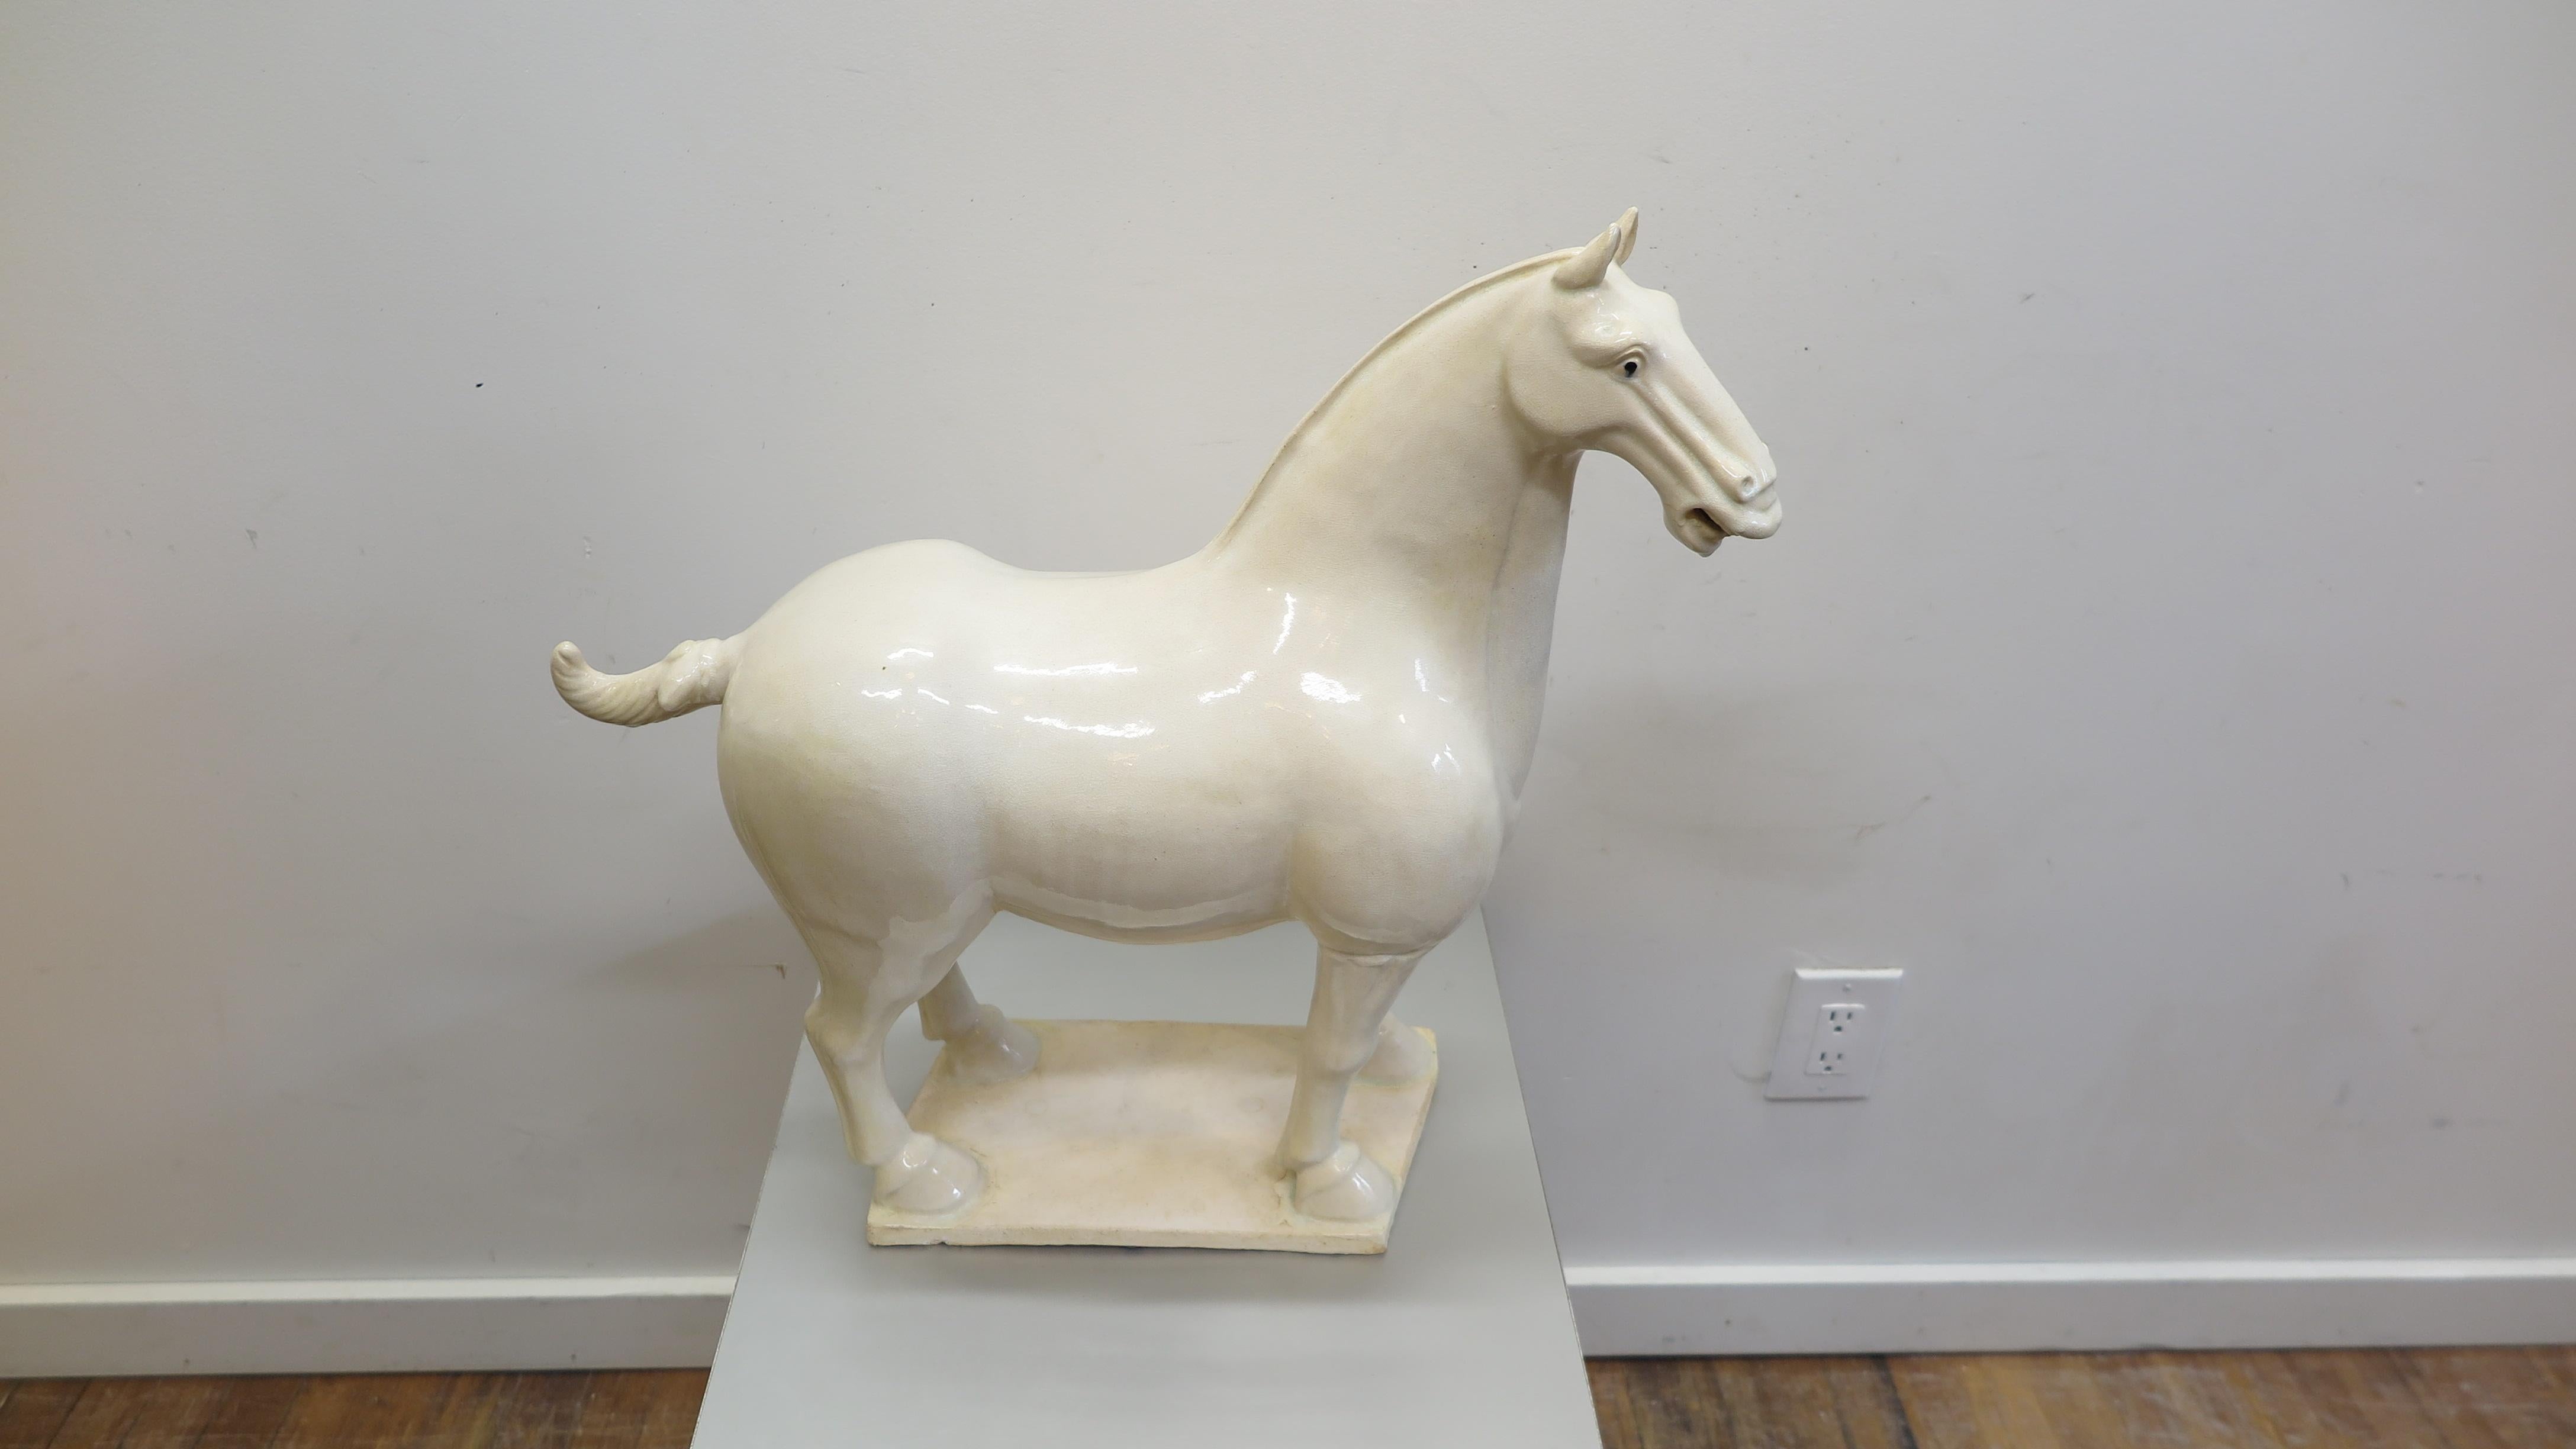 Ceramic horse sculpture in the style of tang dynasty pottery. Late 20th century Chinese ceramic horse sculpture. Off white crackle glaze over pottery. Very nice large scale piece. We have a similar black horse that complements this white horse. See